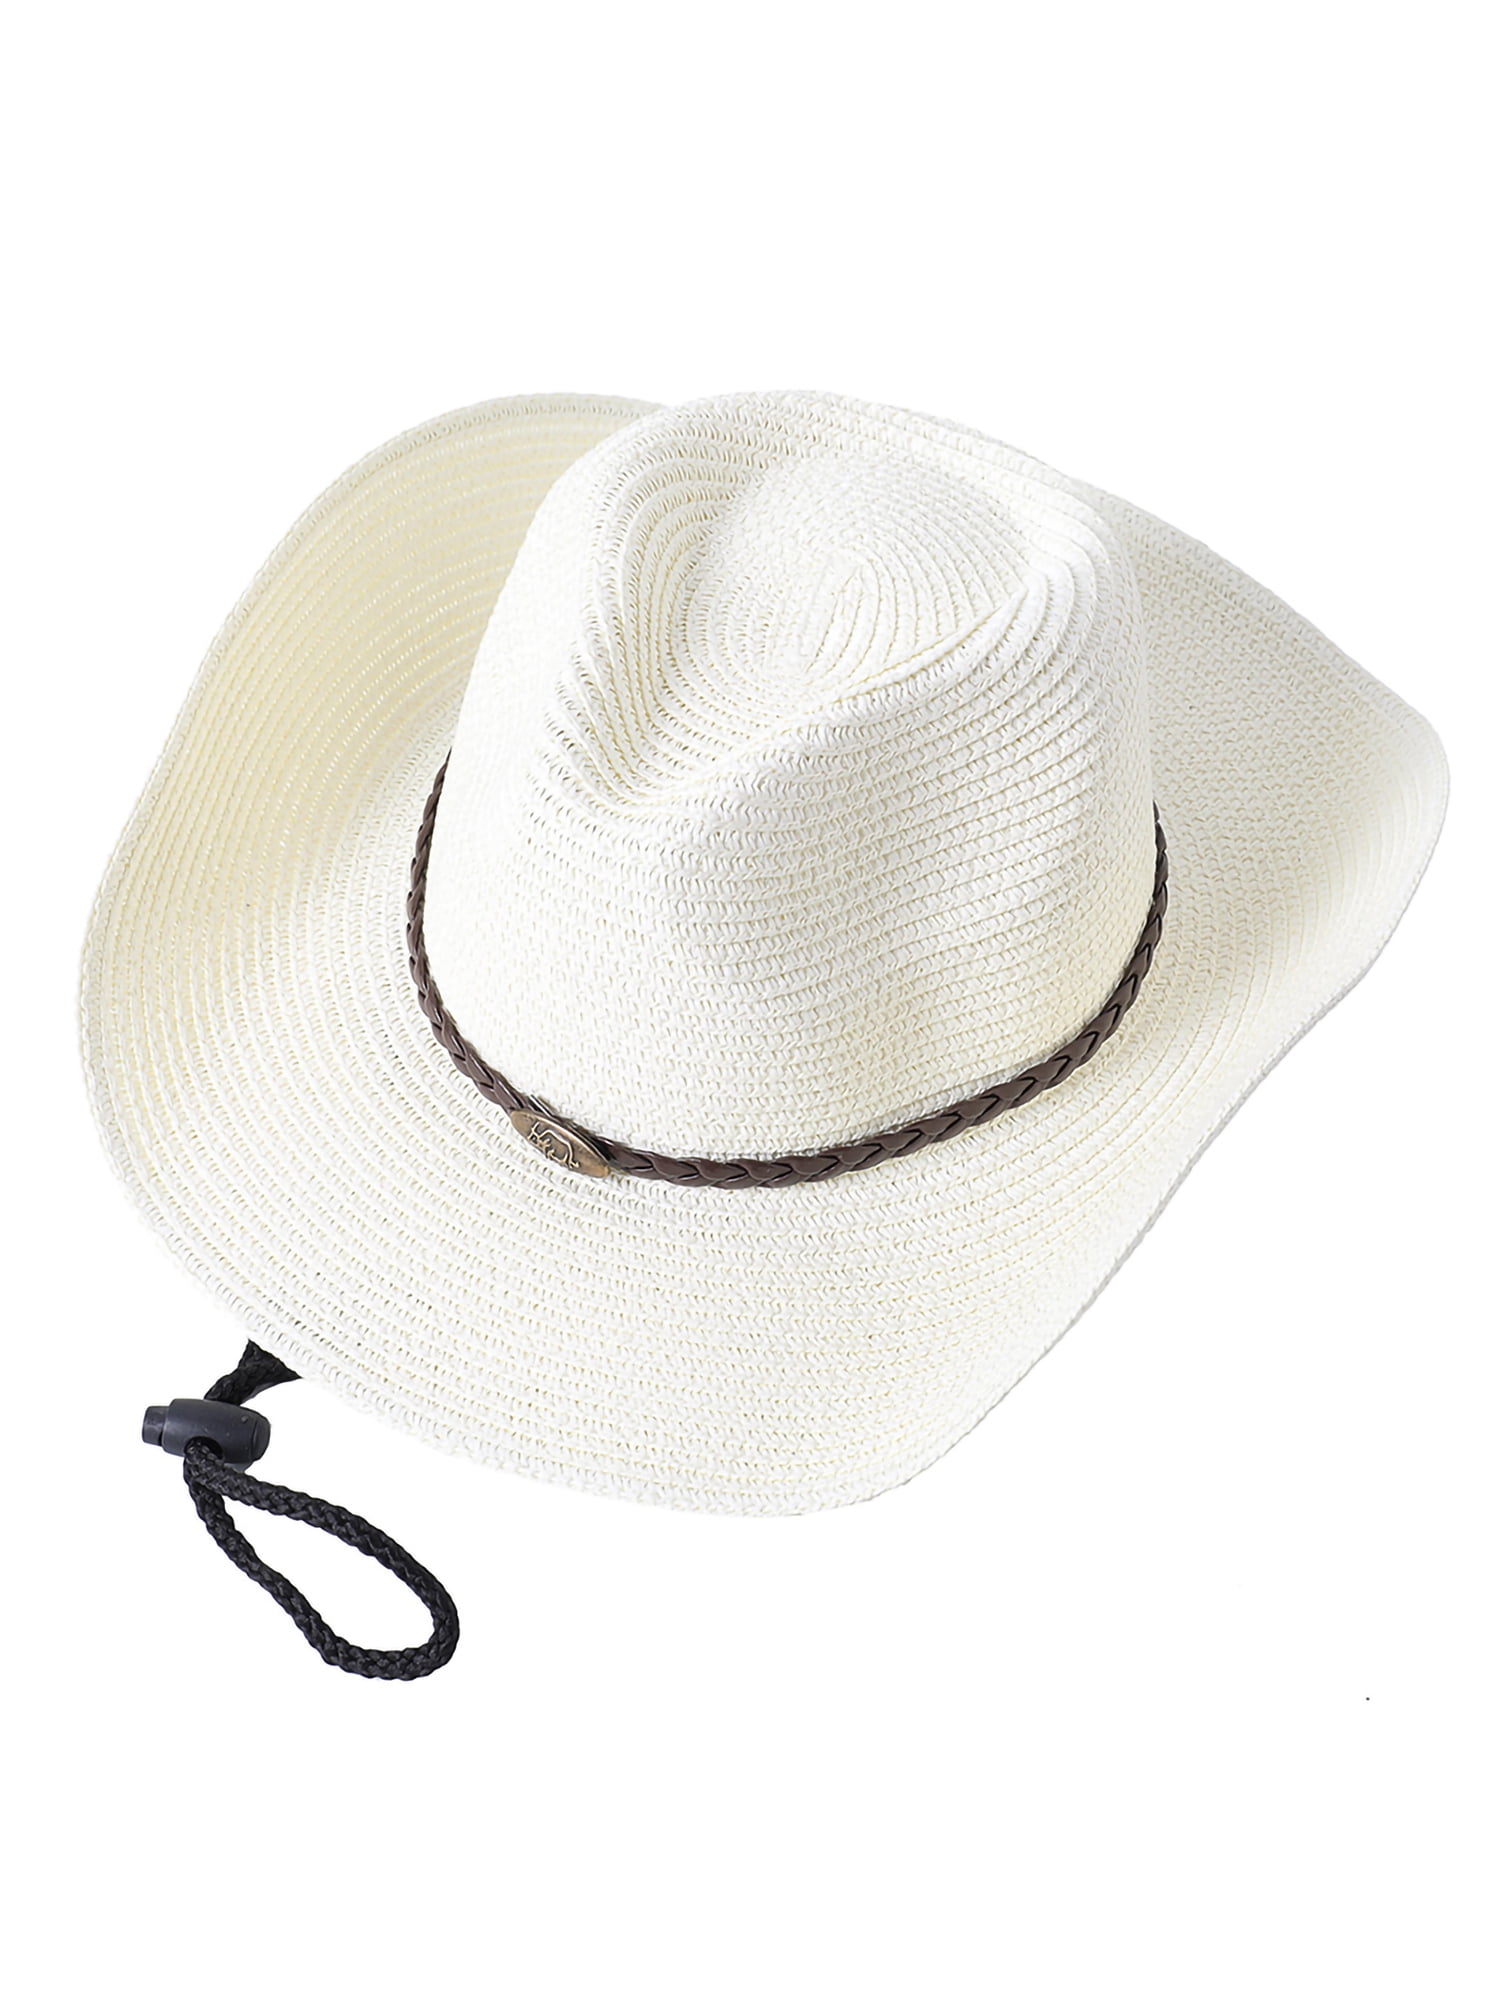 Western Cowboy Hat with String for Women Men Foldable Summer Sun